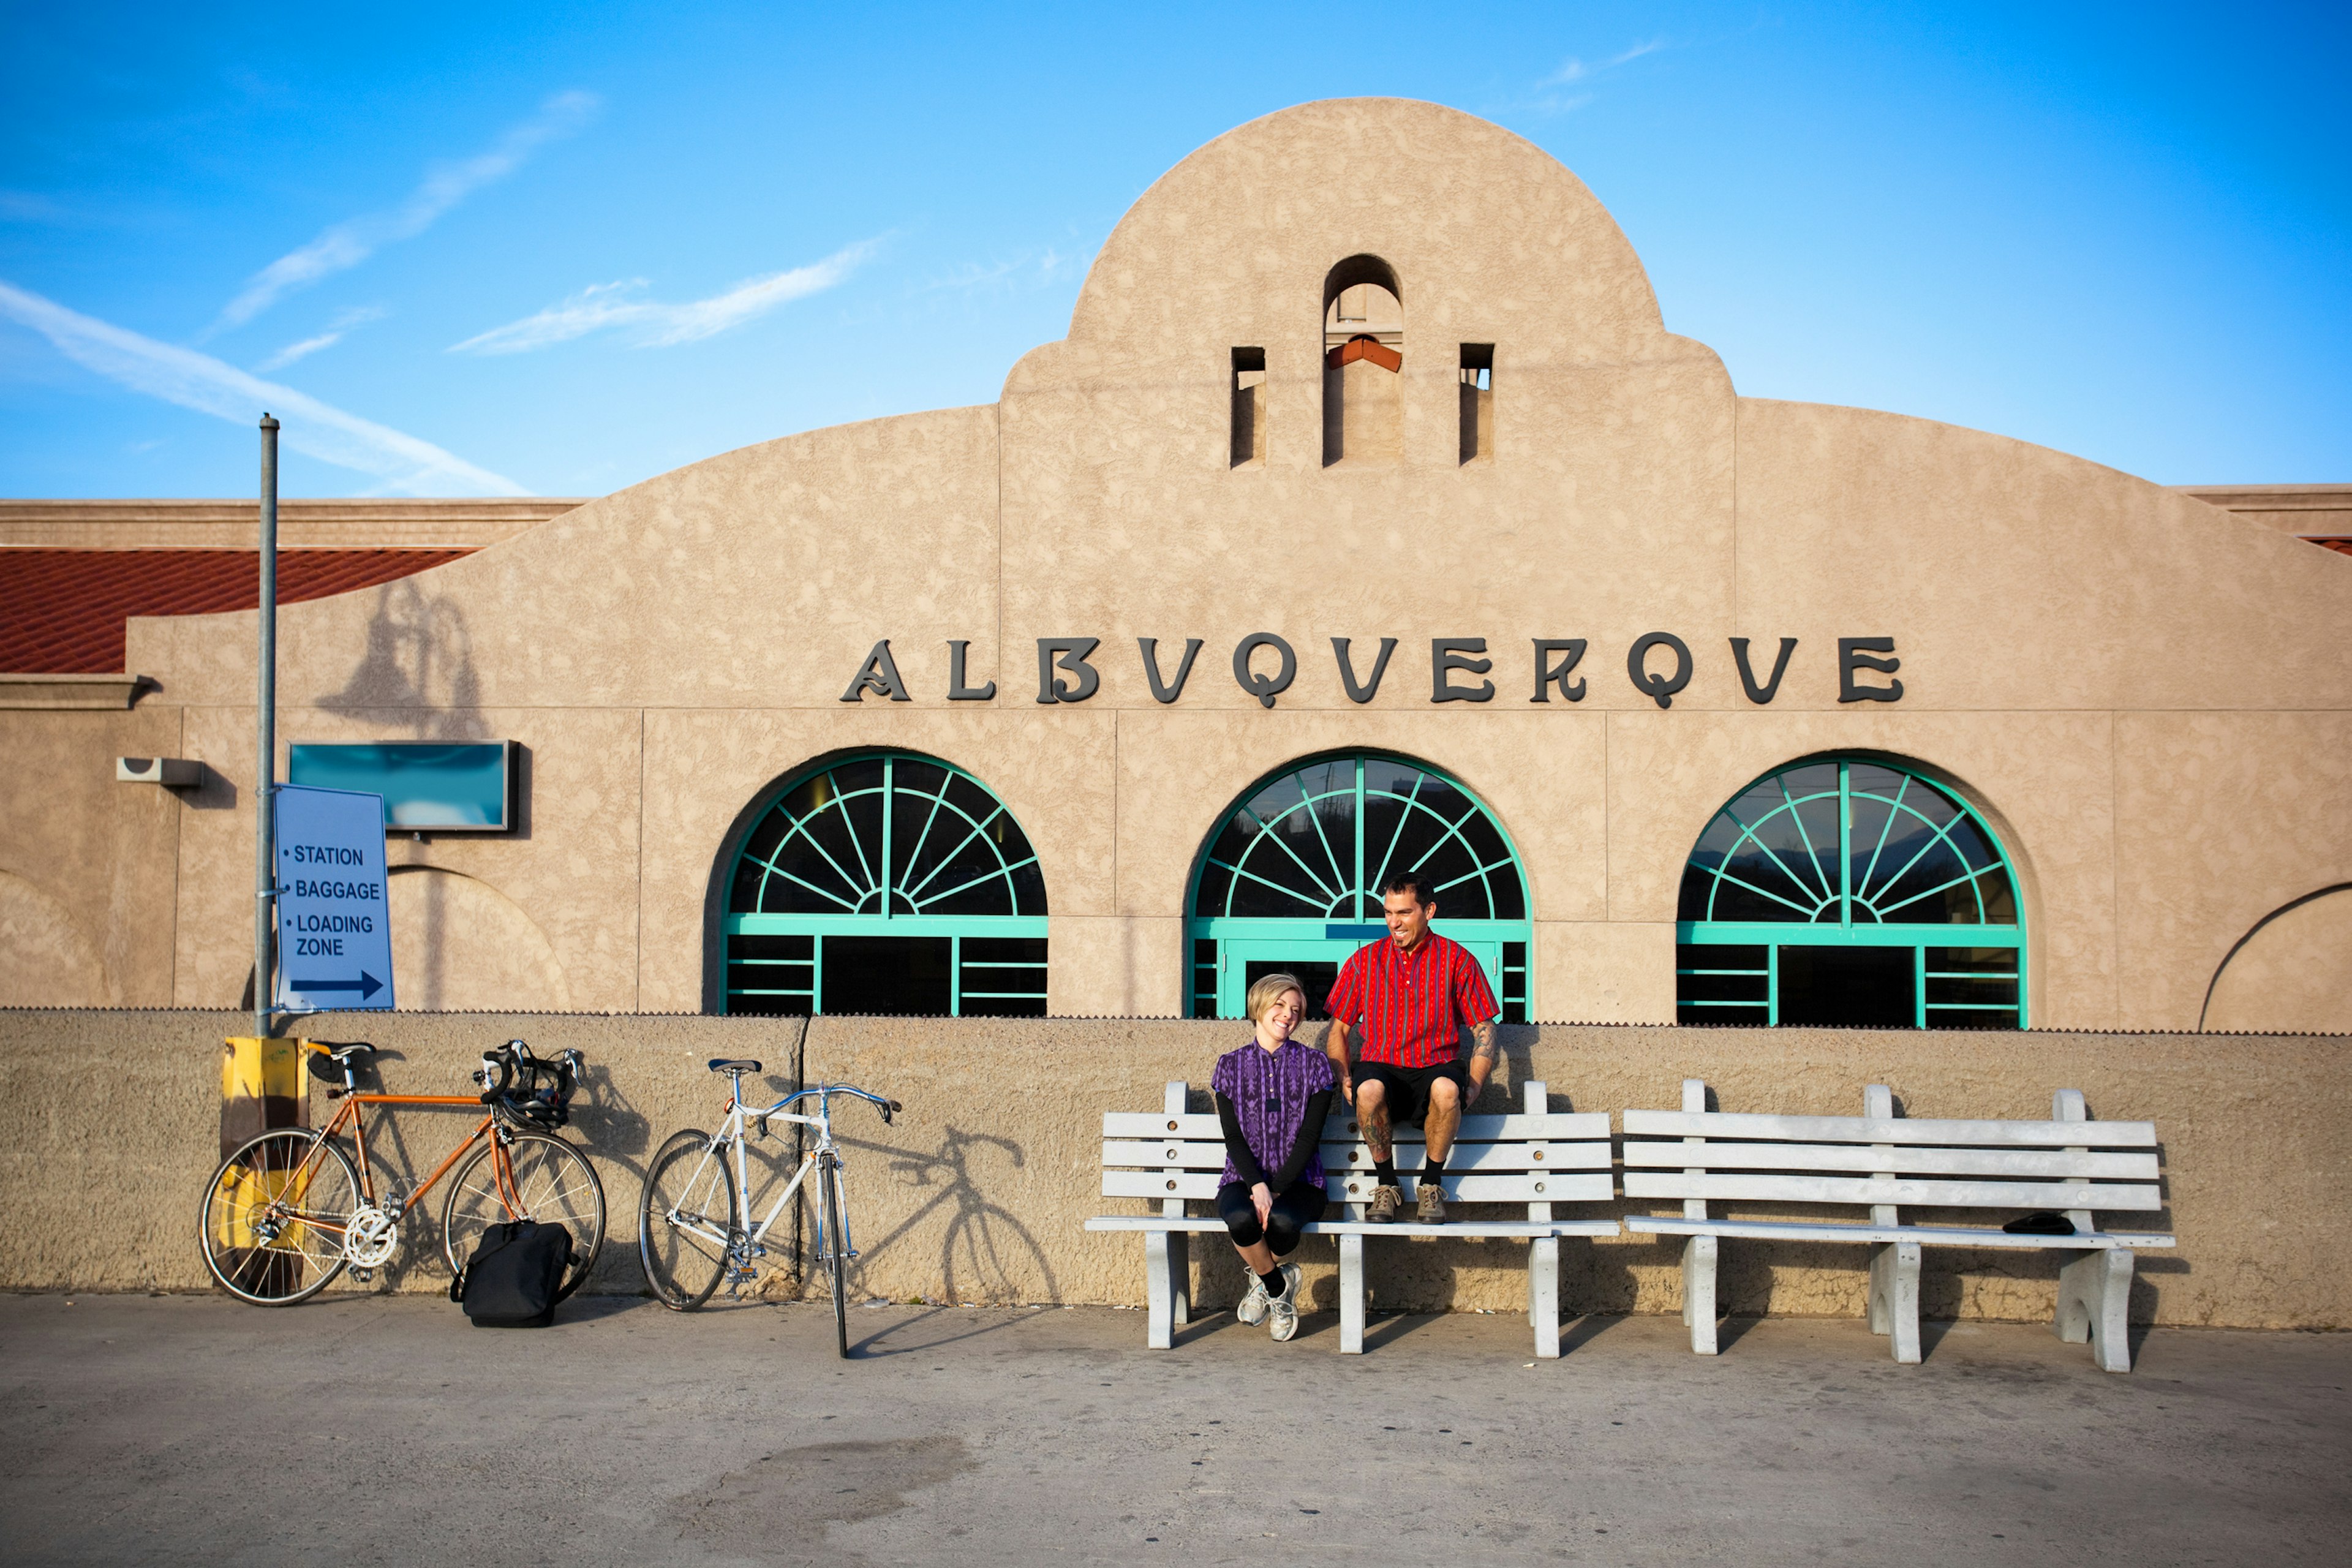 married cyclist couple man and woman take a break and share a laugh while sitting on benches in front of a spanish colonial architecture building train depot.  their bicycles lean against a wall.  horizontal composition taken in albuquerque, new mexico.